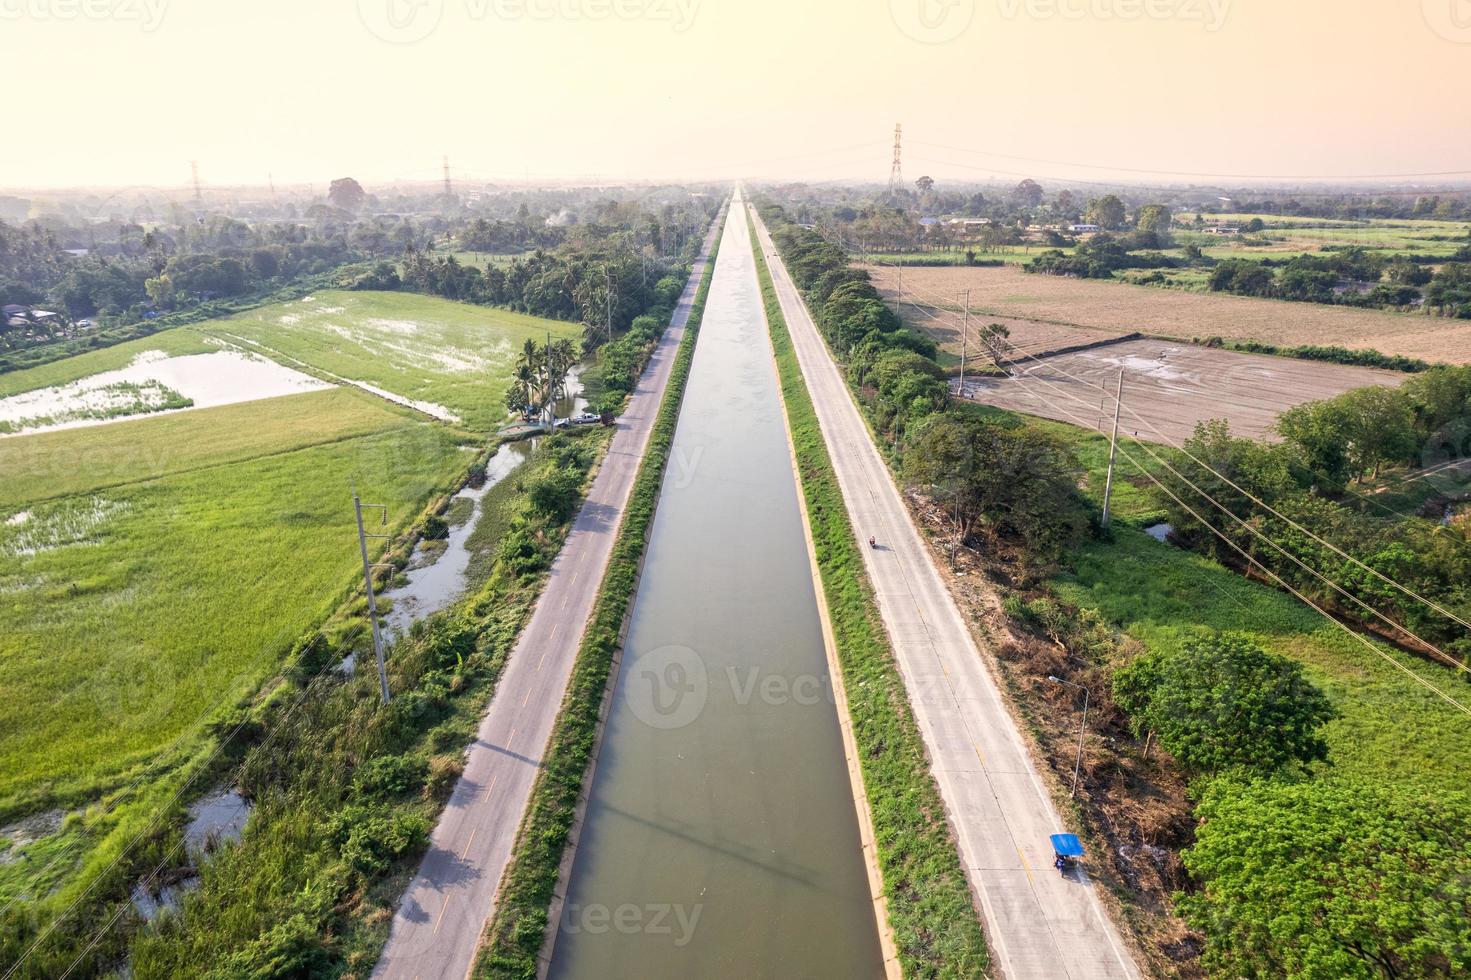 Aerial view of straight irrigation canal system management among the rice field and agronomic in countryside photo